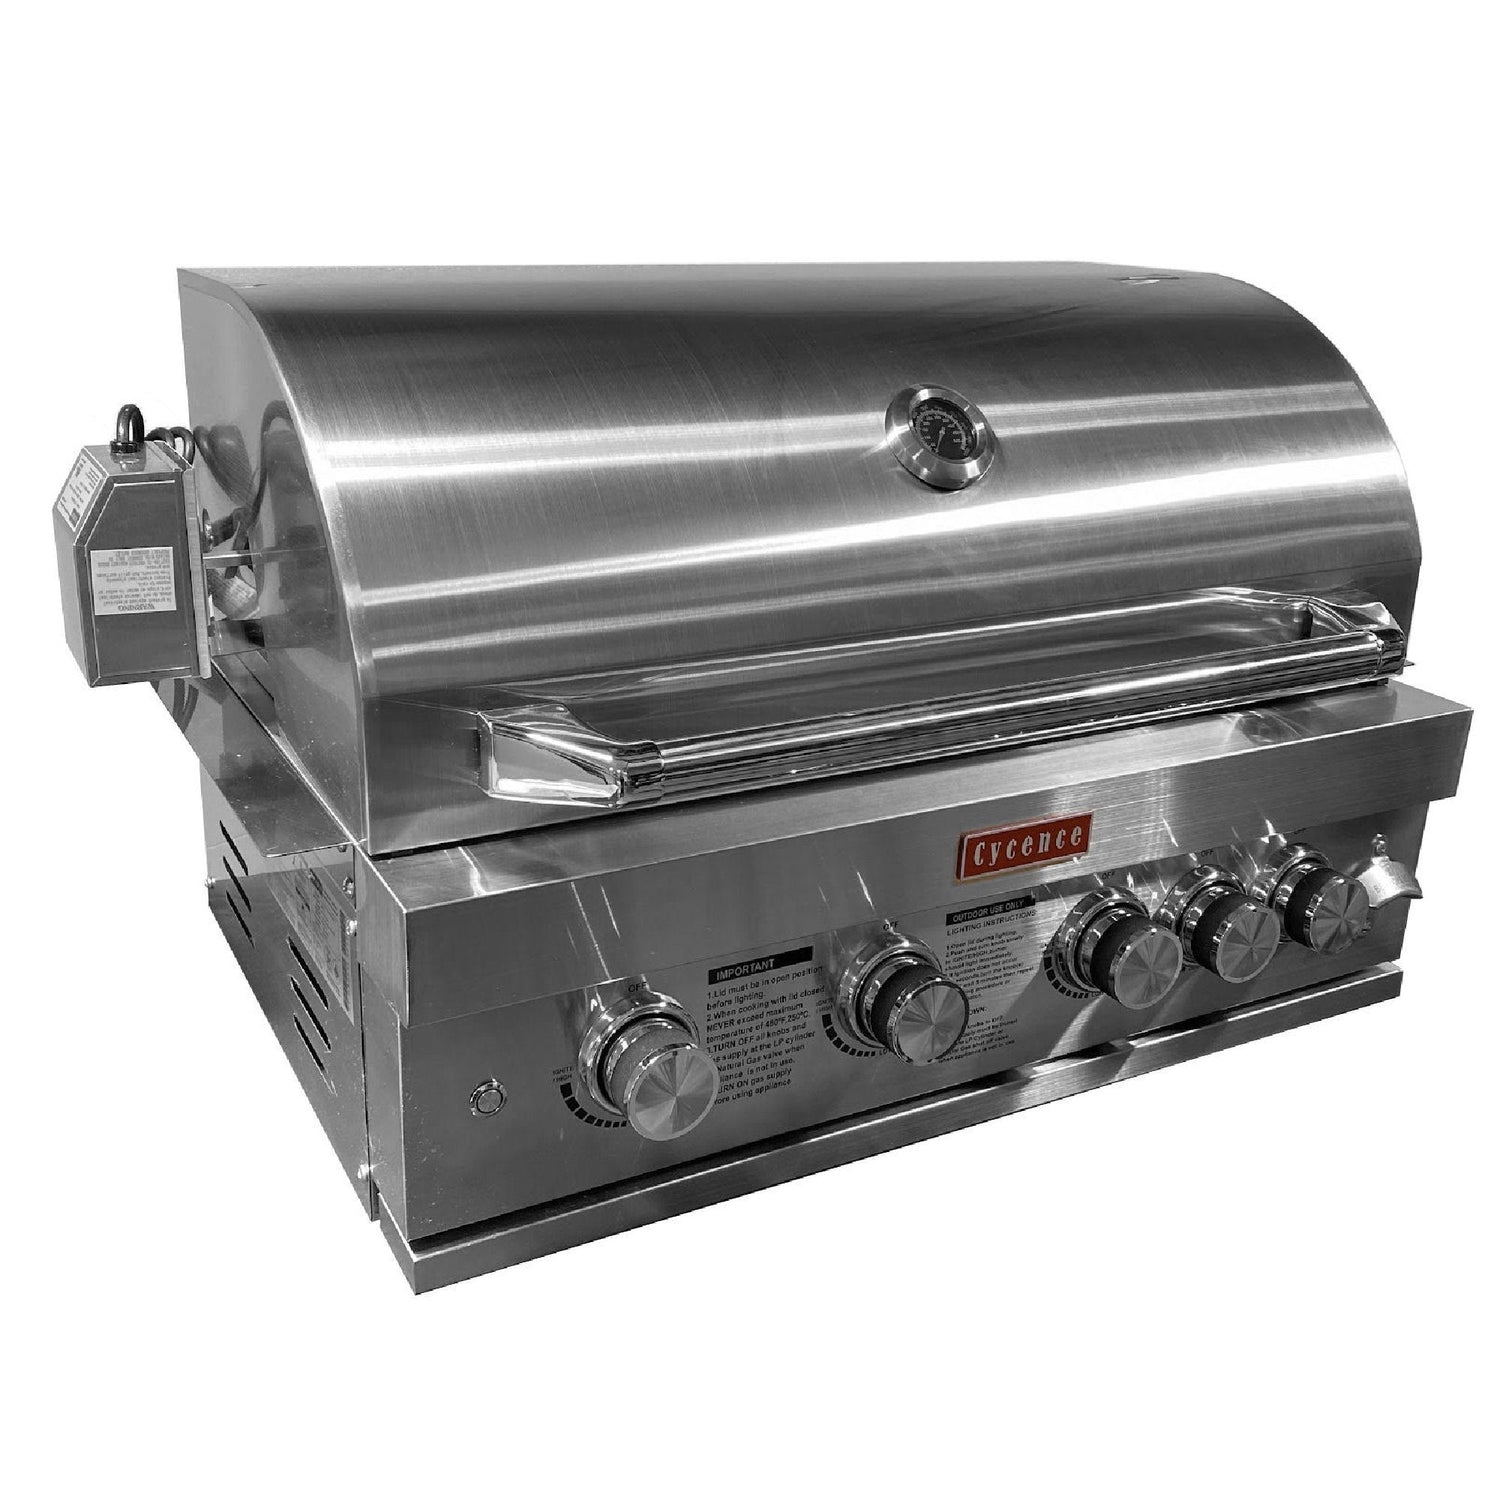 Built-In Gas Grill & Accessories